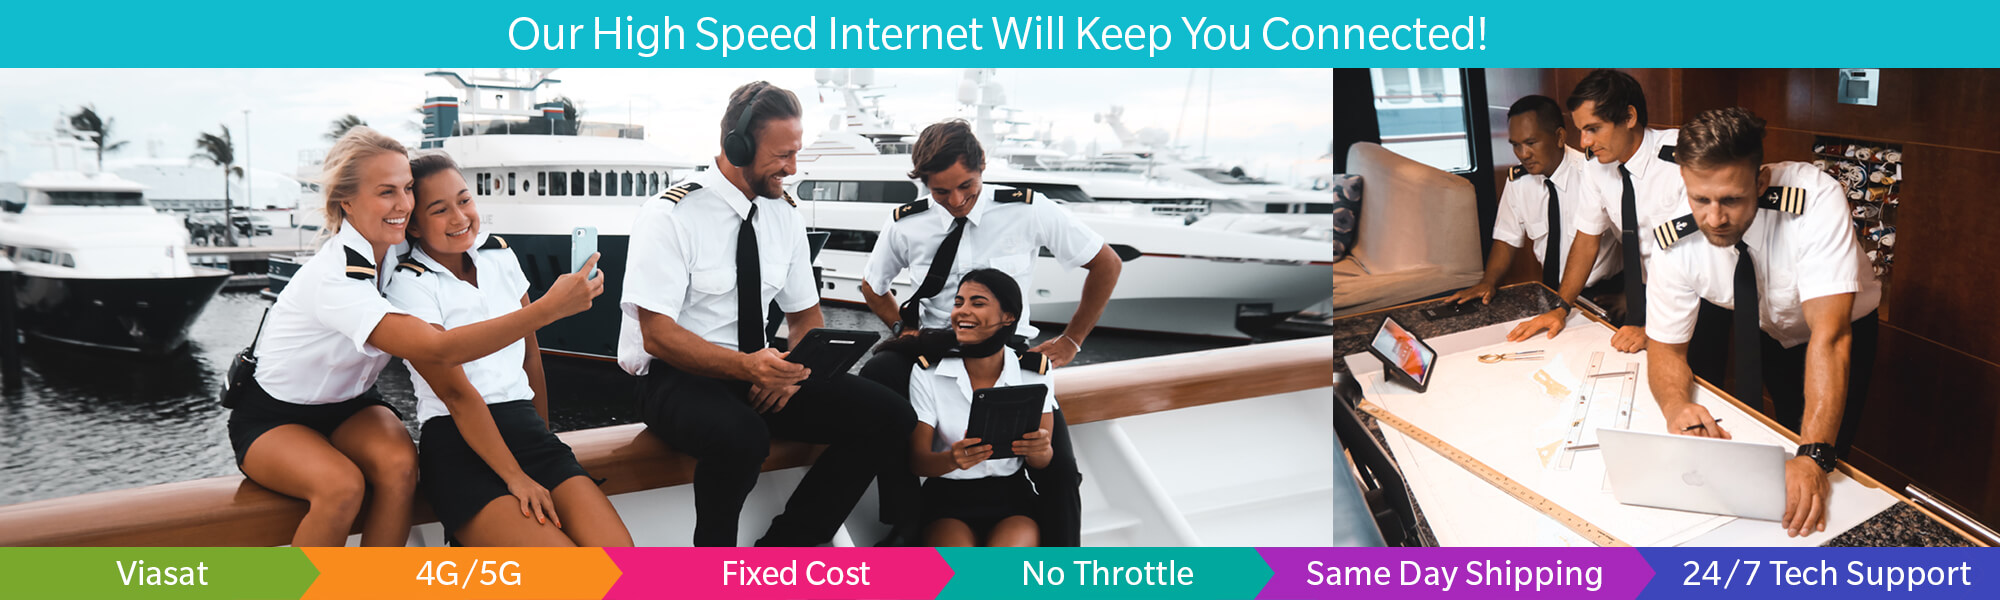 Our Affordable Internet Will Keep You Connected